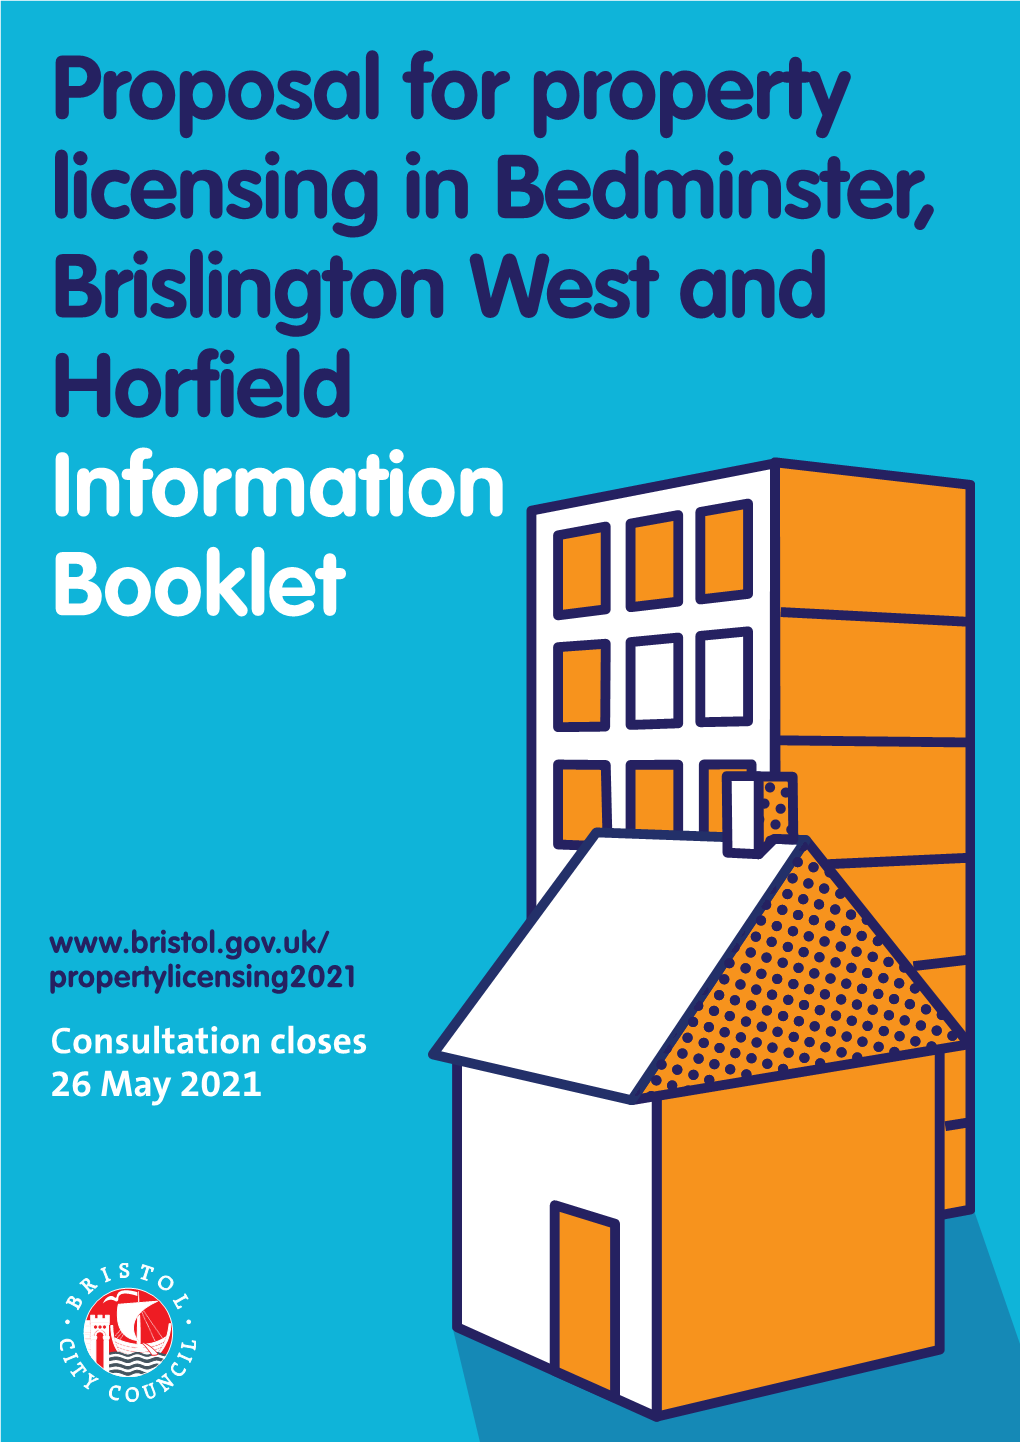 Proposal for Property Licensing in Bedminster, Brislington West and Horfield Information Booklet